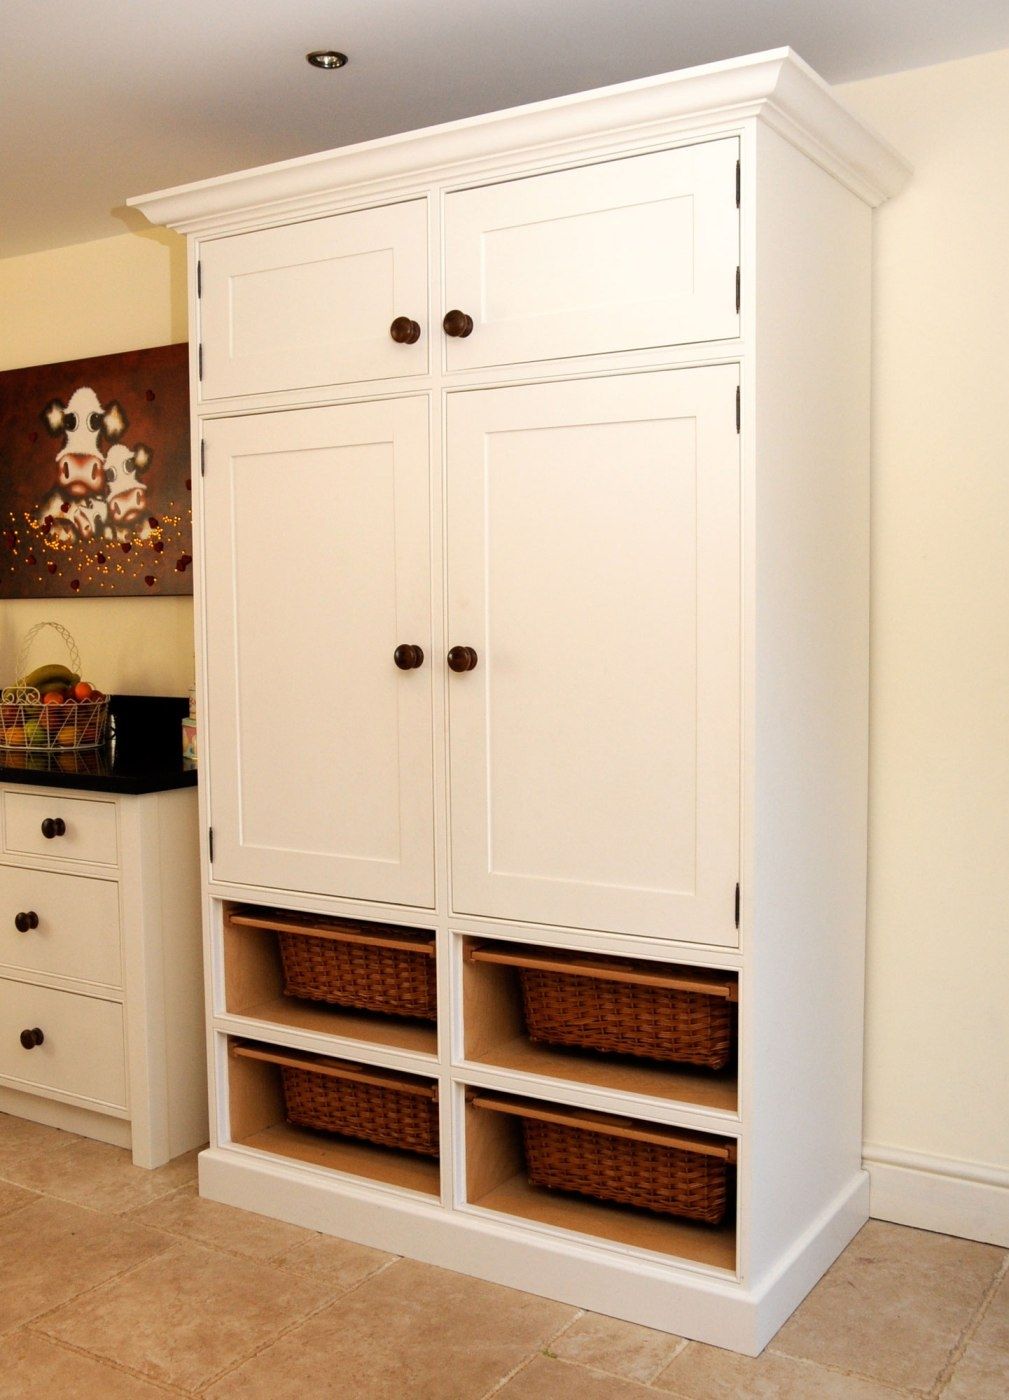 Lowes Free Standing Kitchen Cabinets Kitchens Pinterest With Free Standing Kitchen Larder Cupboards (View 9 of 25)